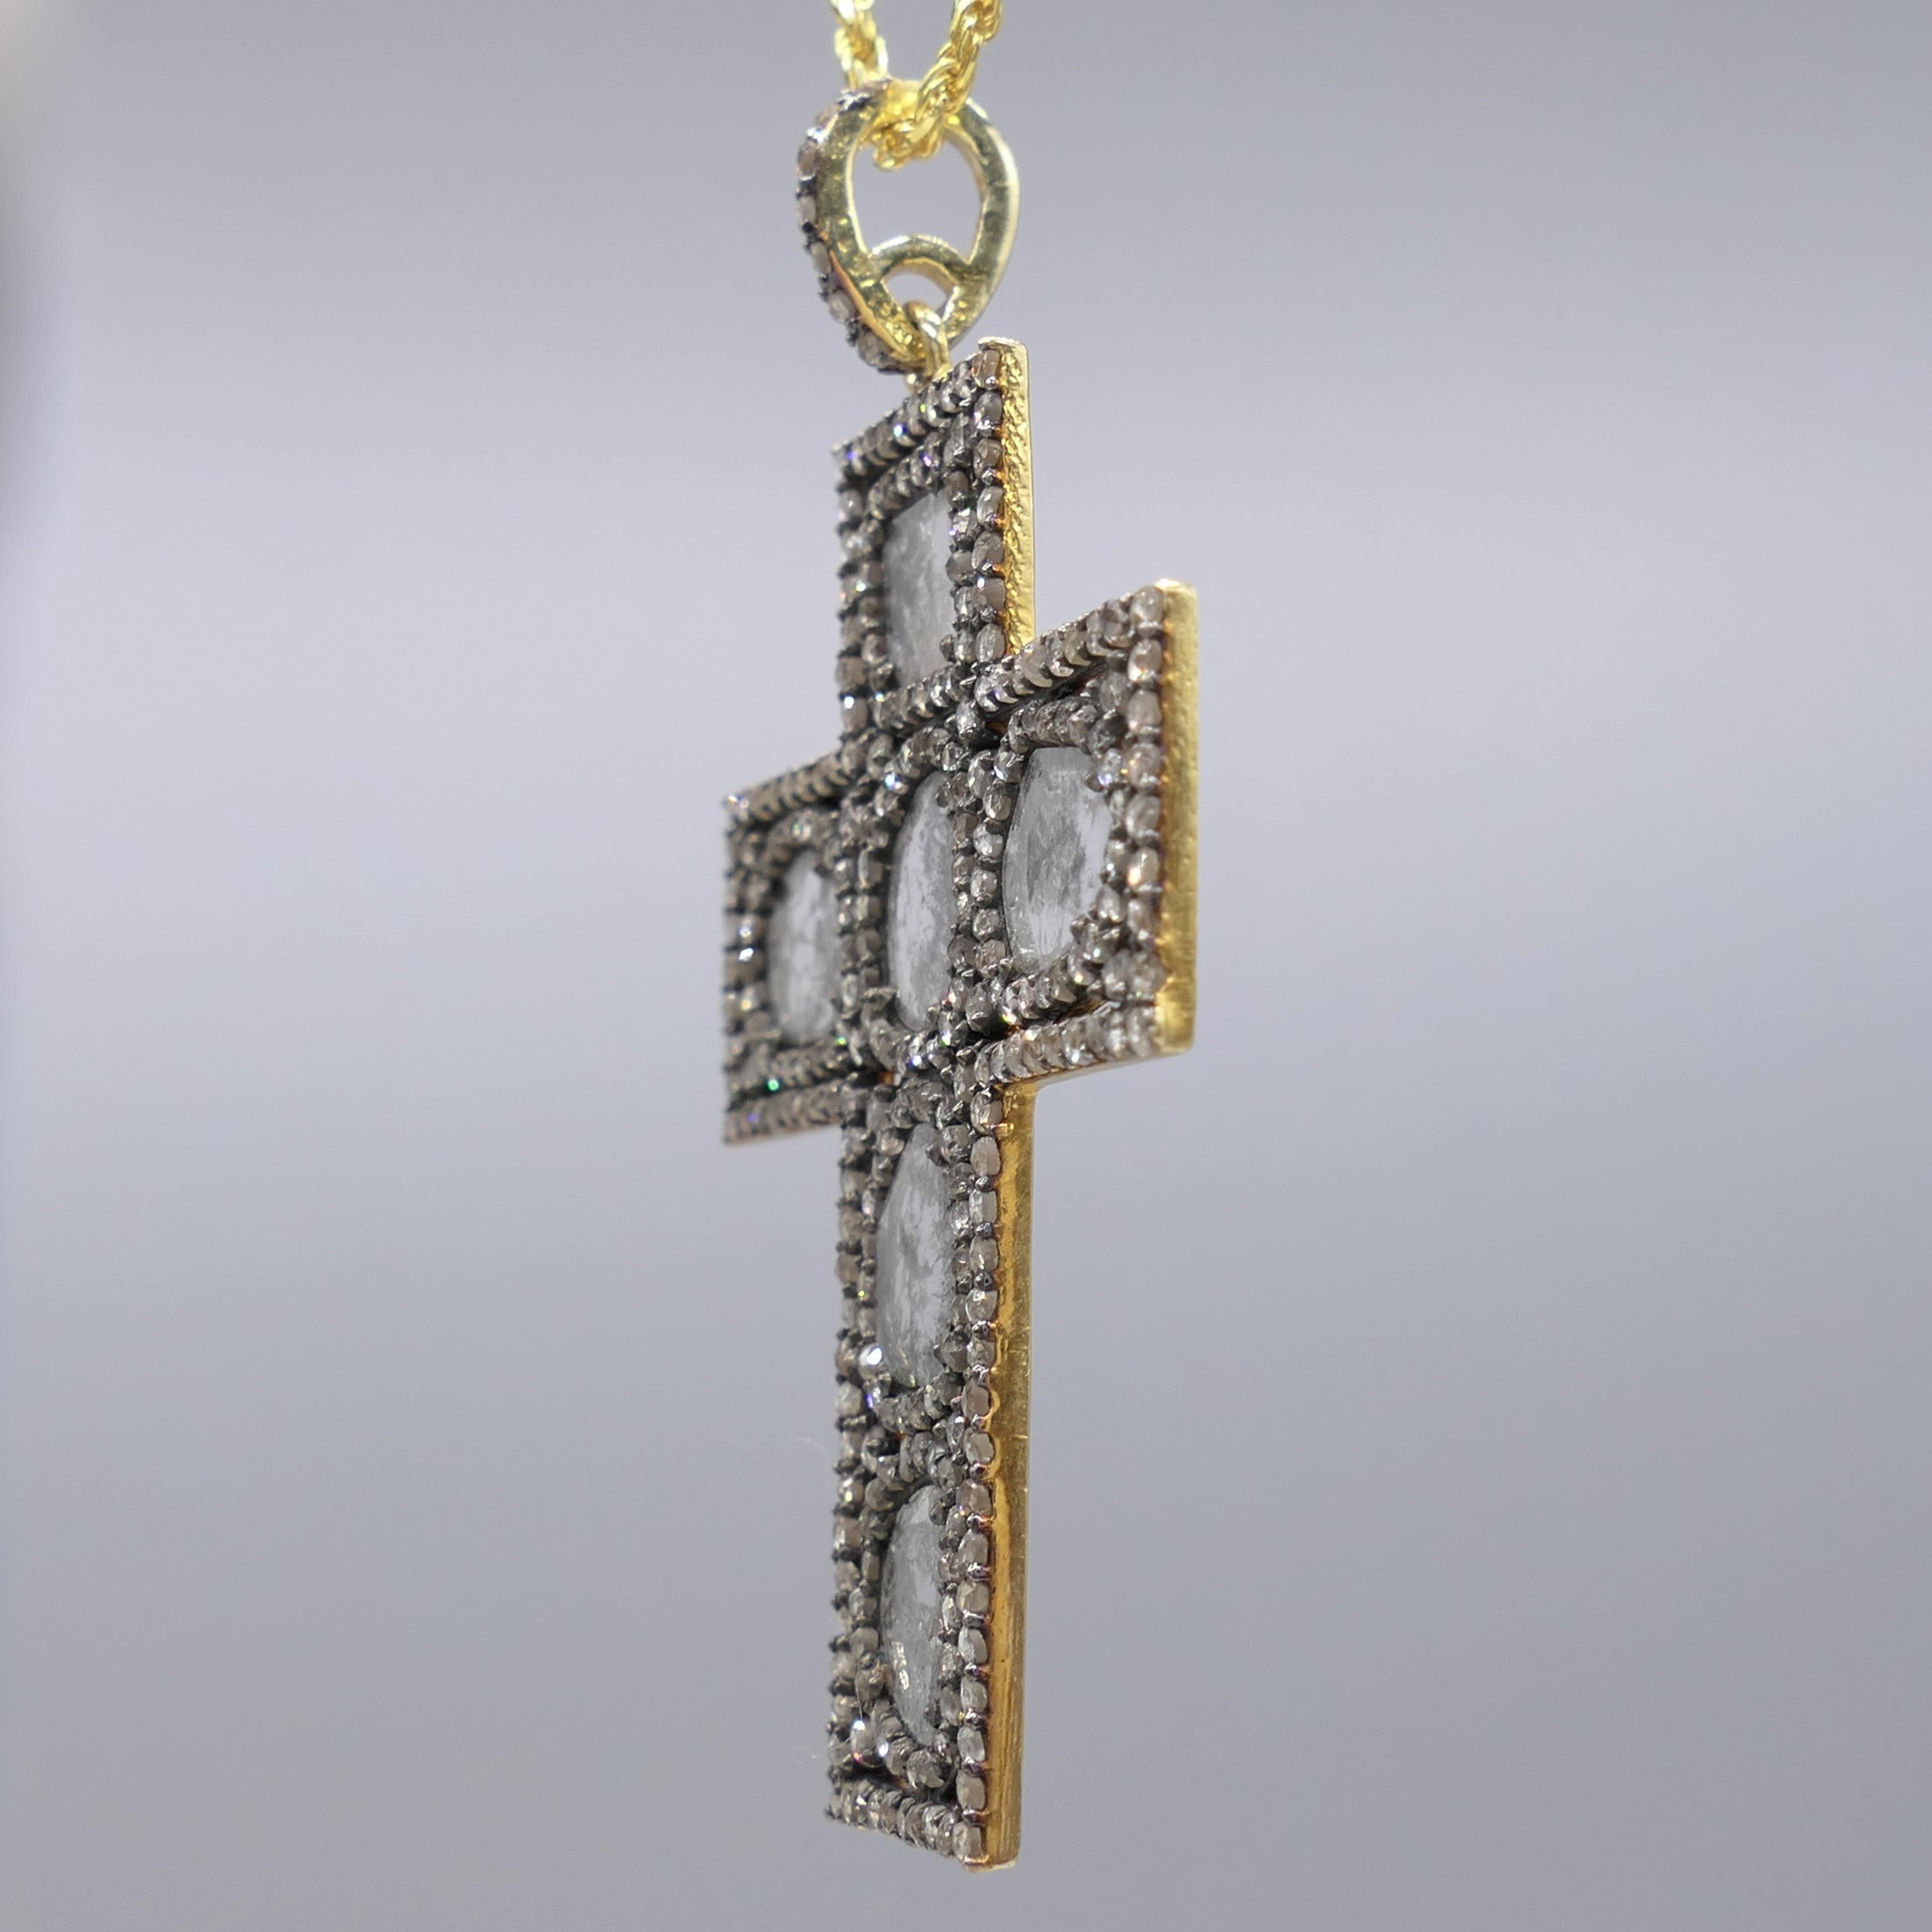 One-Off 3.80 Carat Large Diamond Cross Necklace With Chain - Image 6 of 6